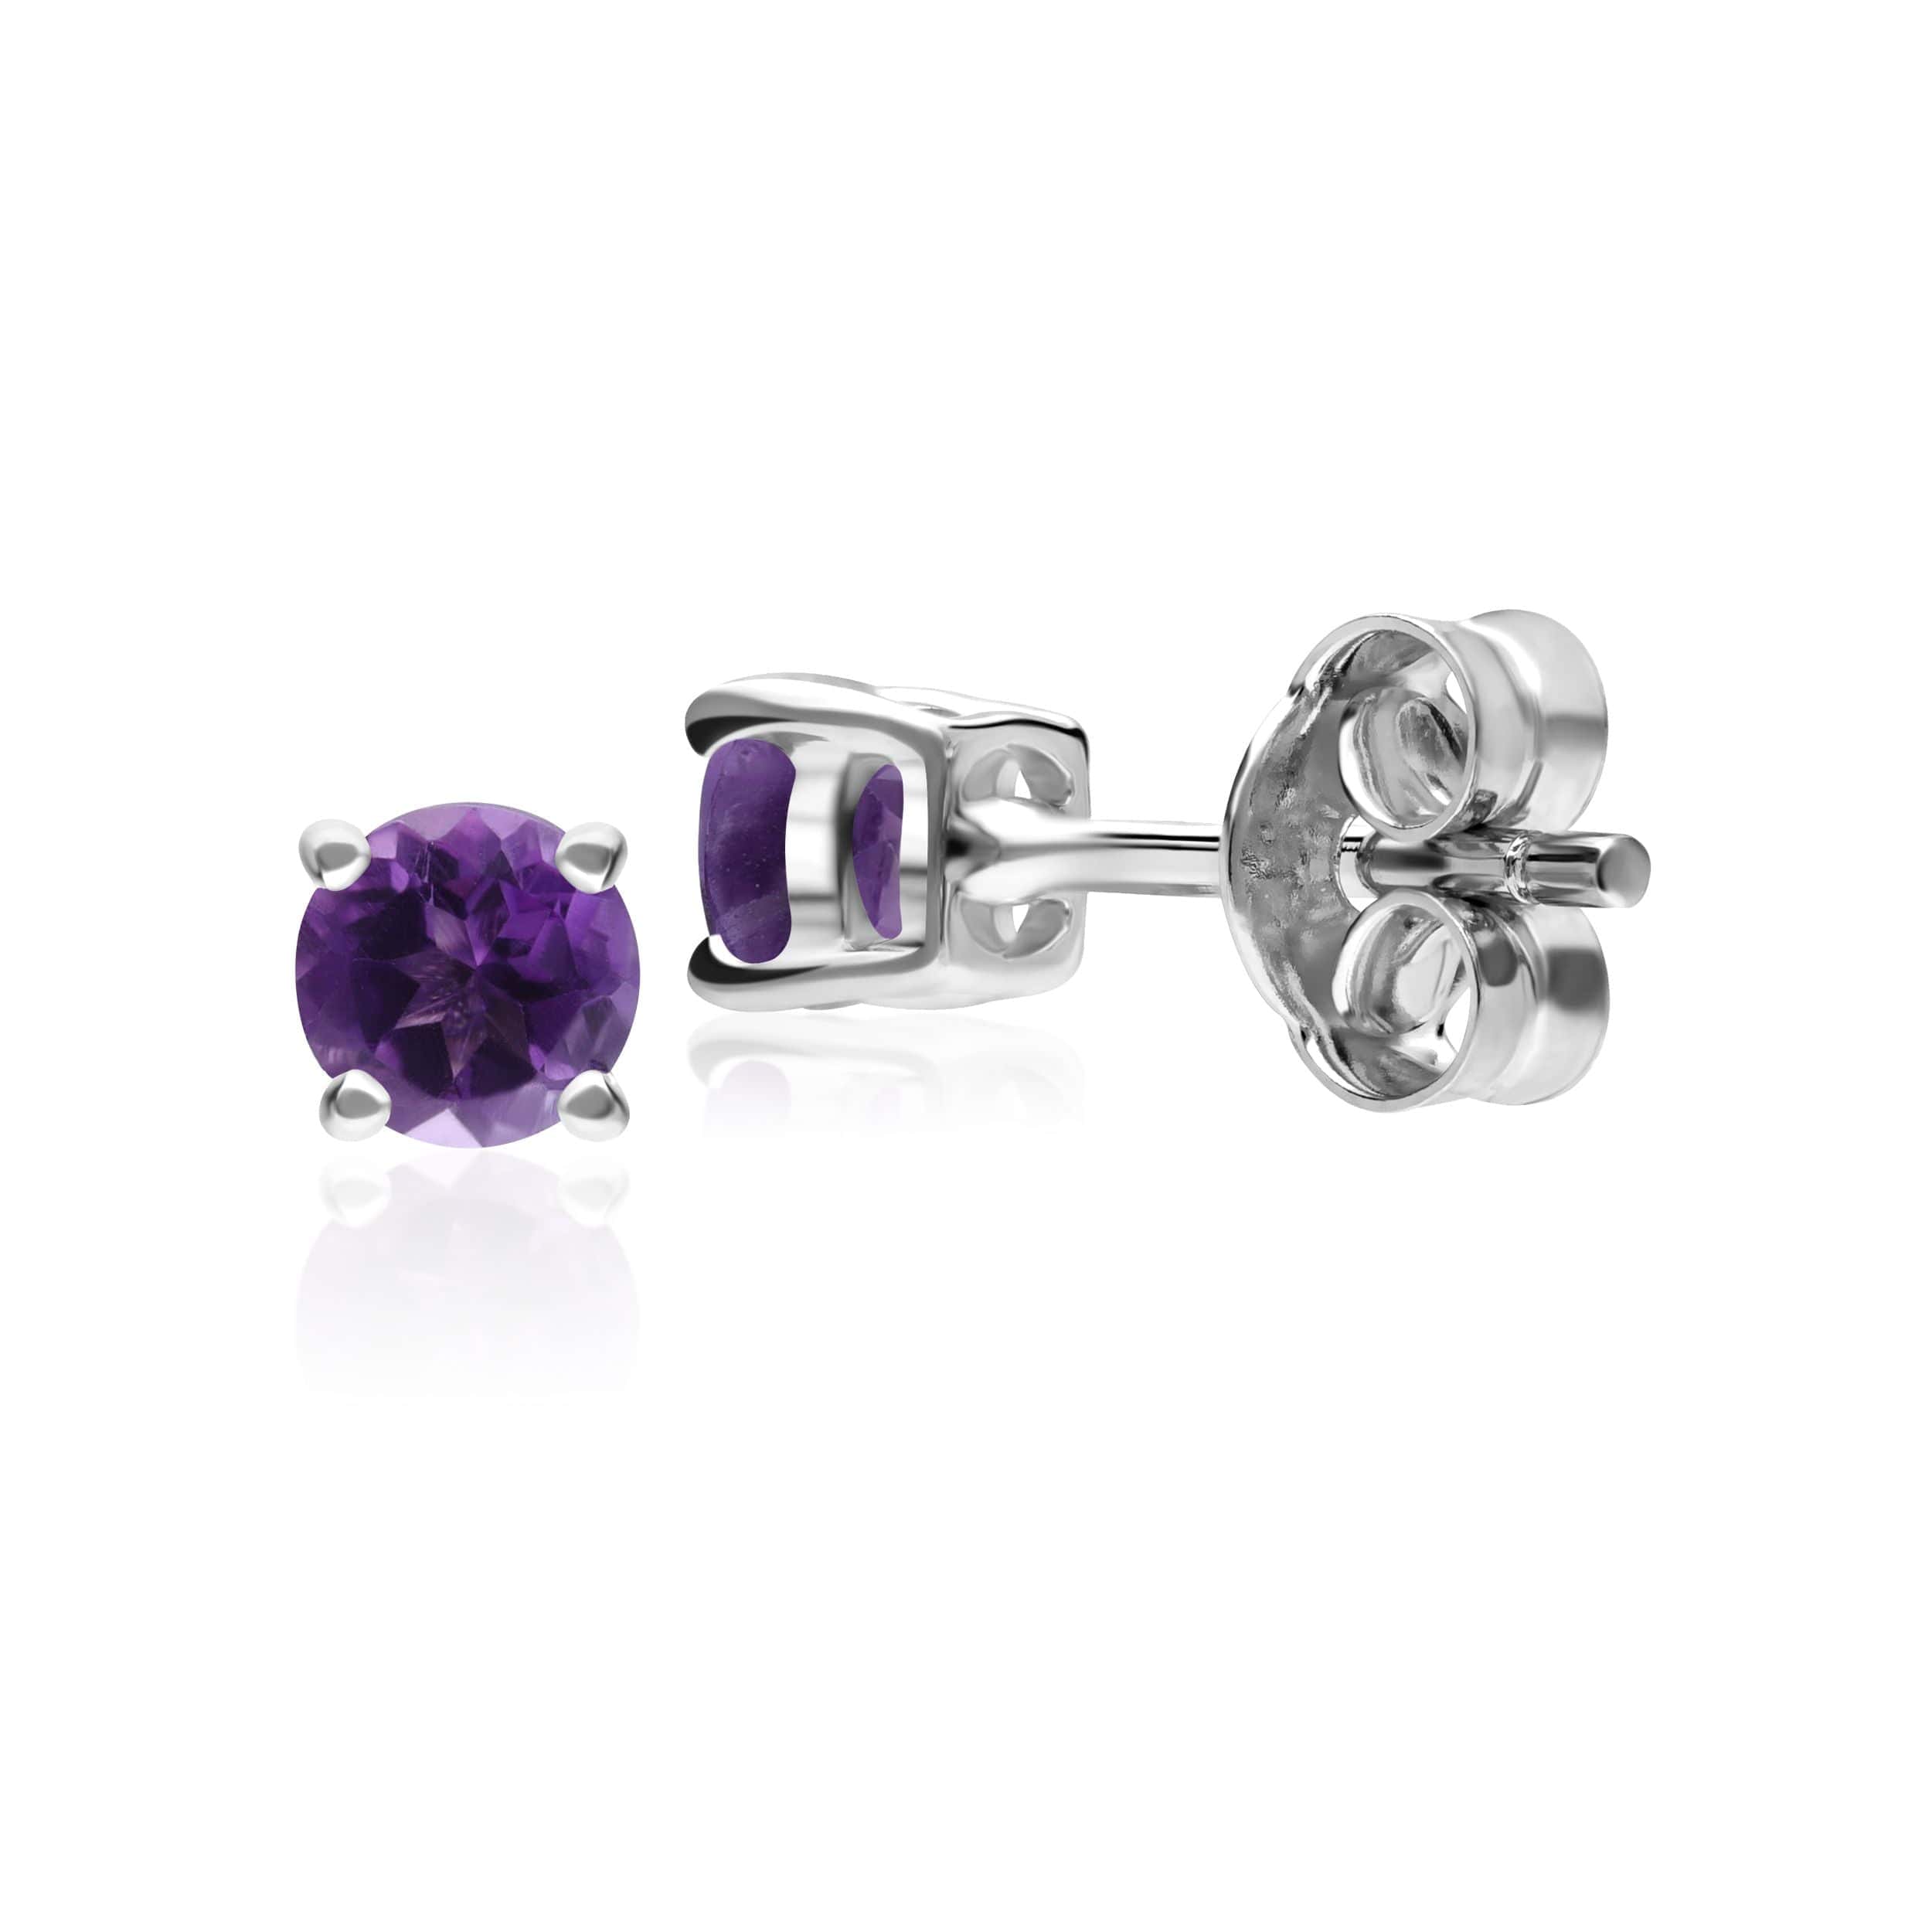 Classic Round Amethyst Stud Earrings in 9ct White Gold 3.5mm - Gemondo